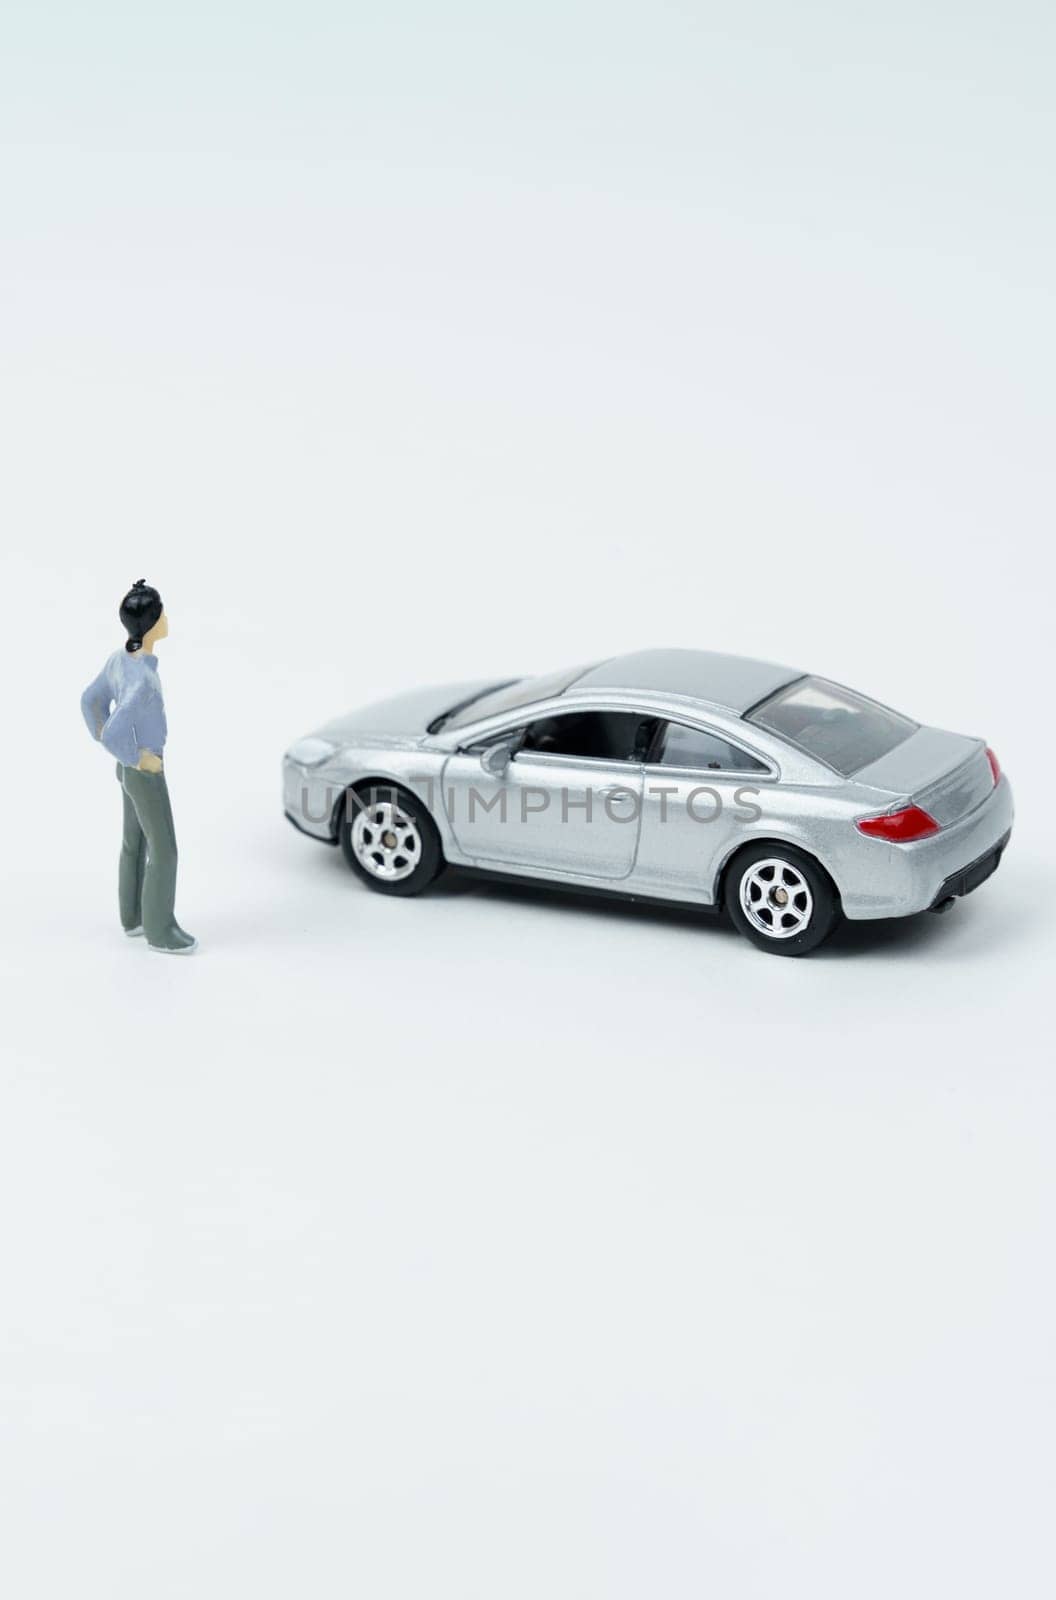 On a white surface is a car and a miniature figurine of a man looking at the car. by Sd28DimoN_1976